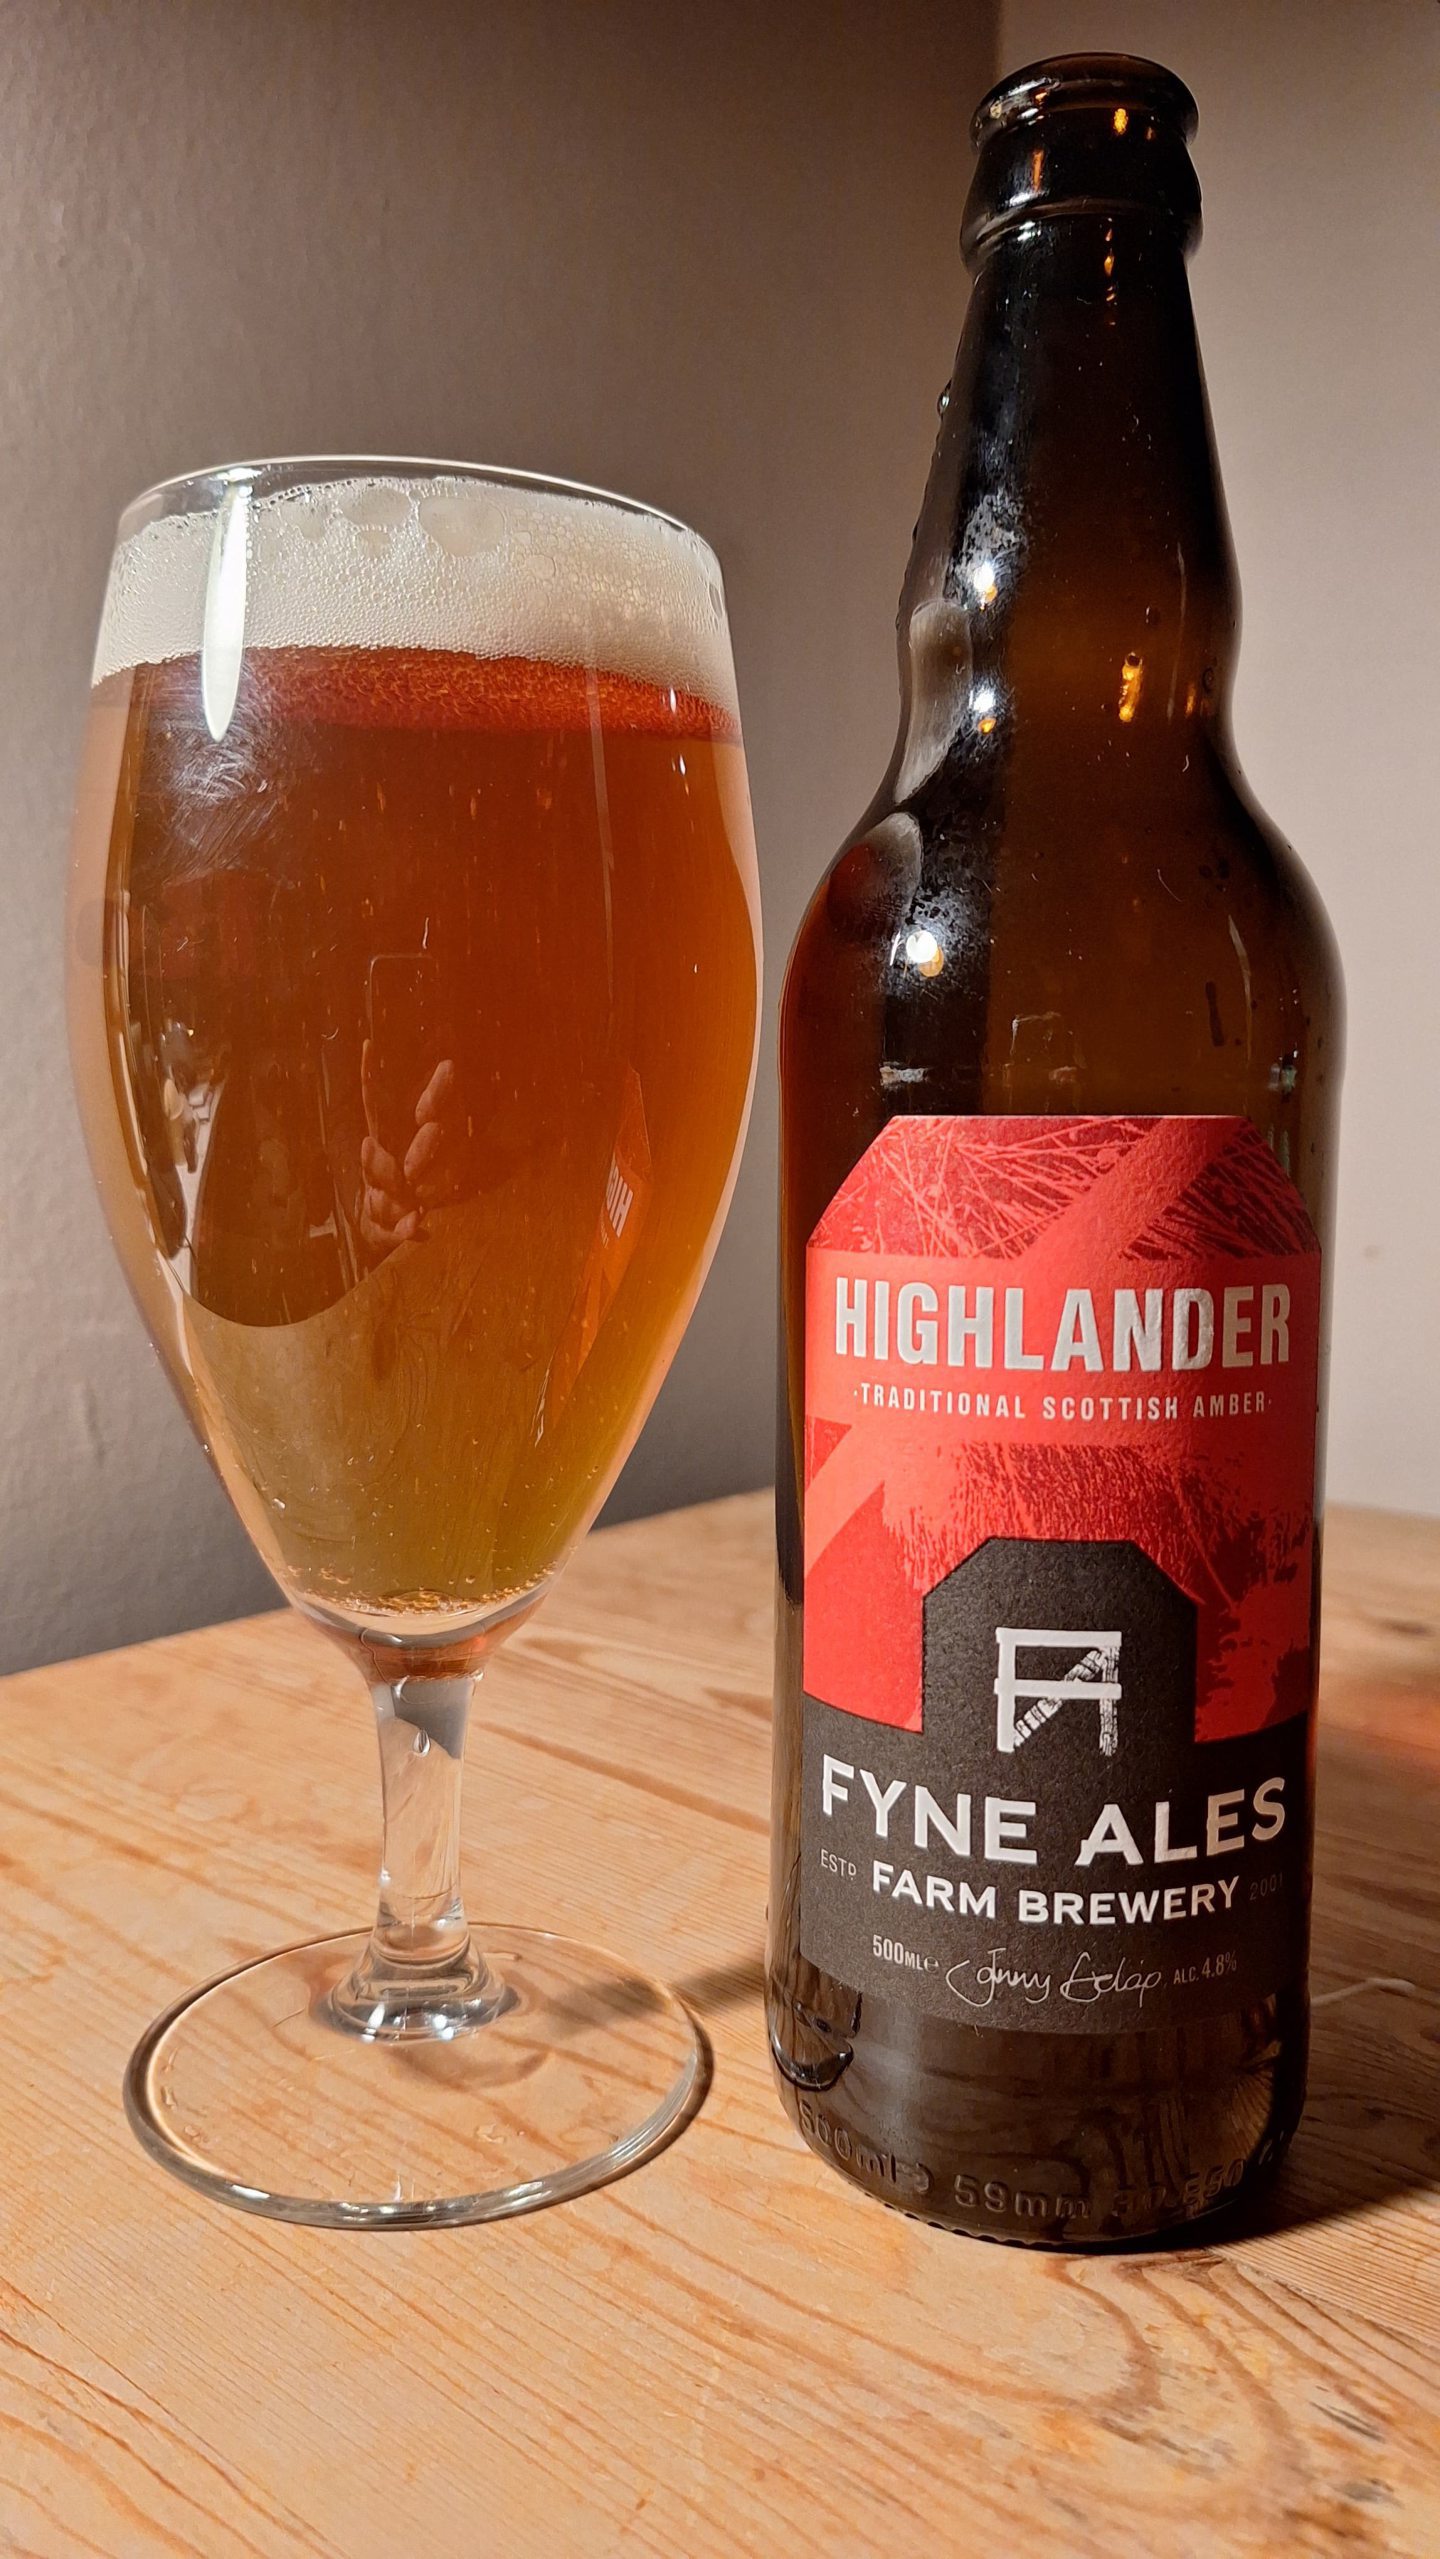 The Highlander amber ale poured out into a glass. 